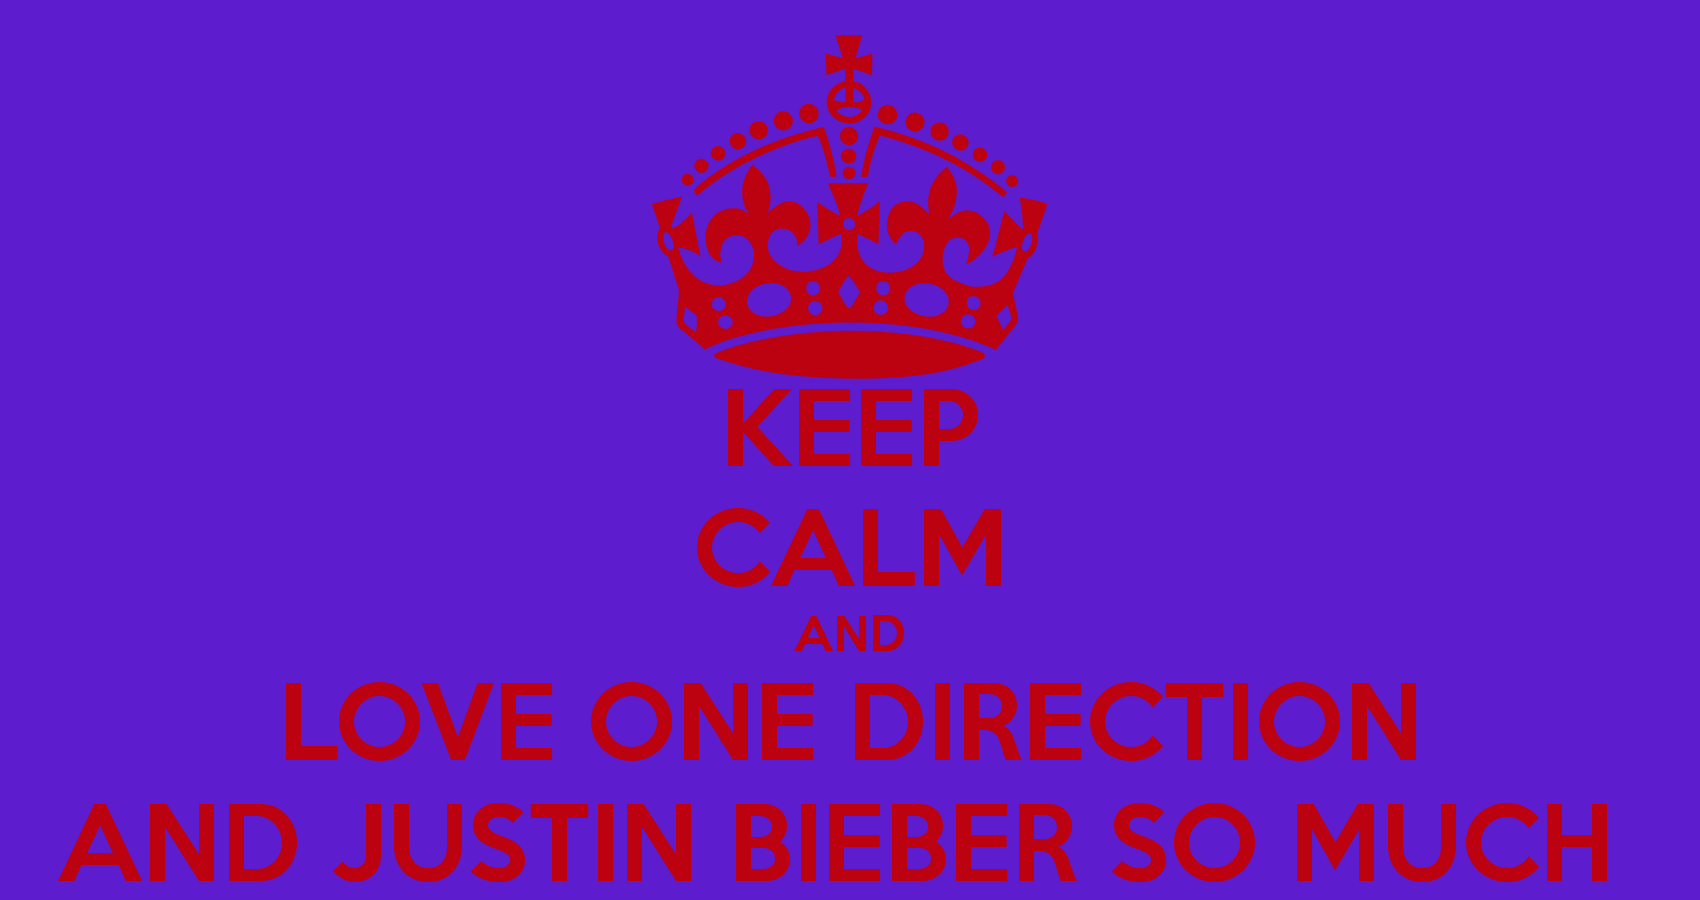 KEEP CALM AND LOVE ONE DIRECTION AND JUSTIN BIEBER SO MUCH Poster